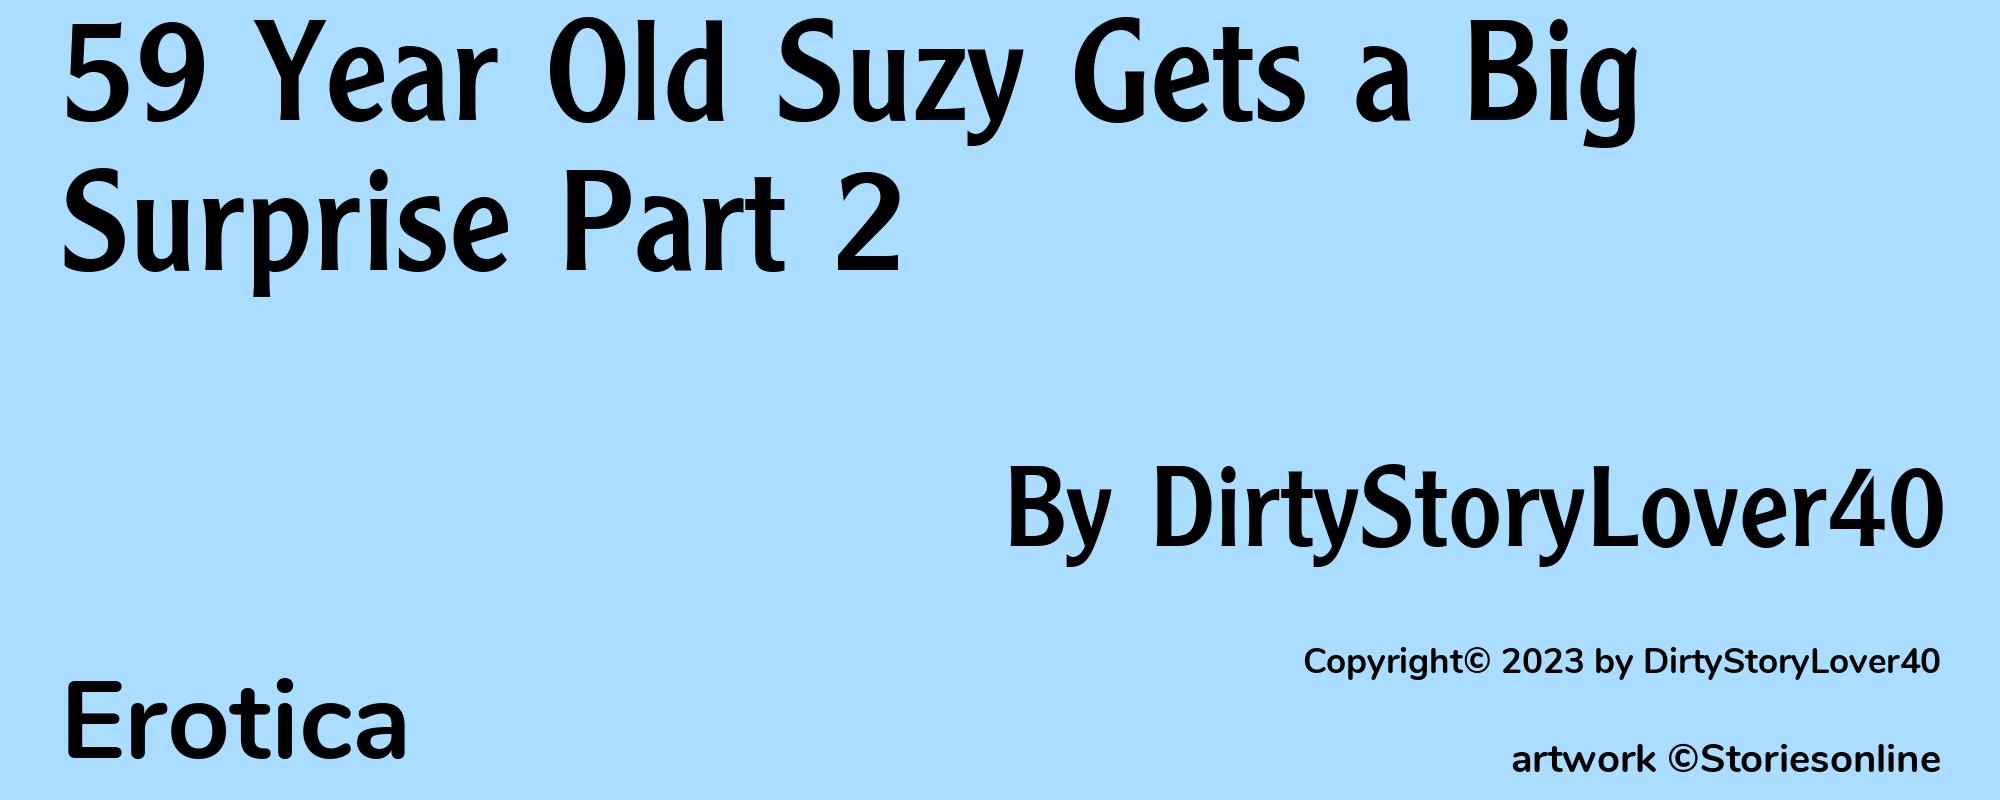 59 Year Old Suzy Gets a Big Surprise Part 2 - Cover